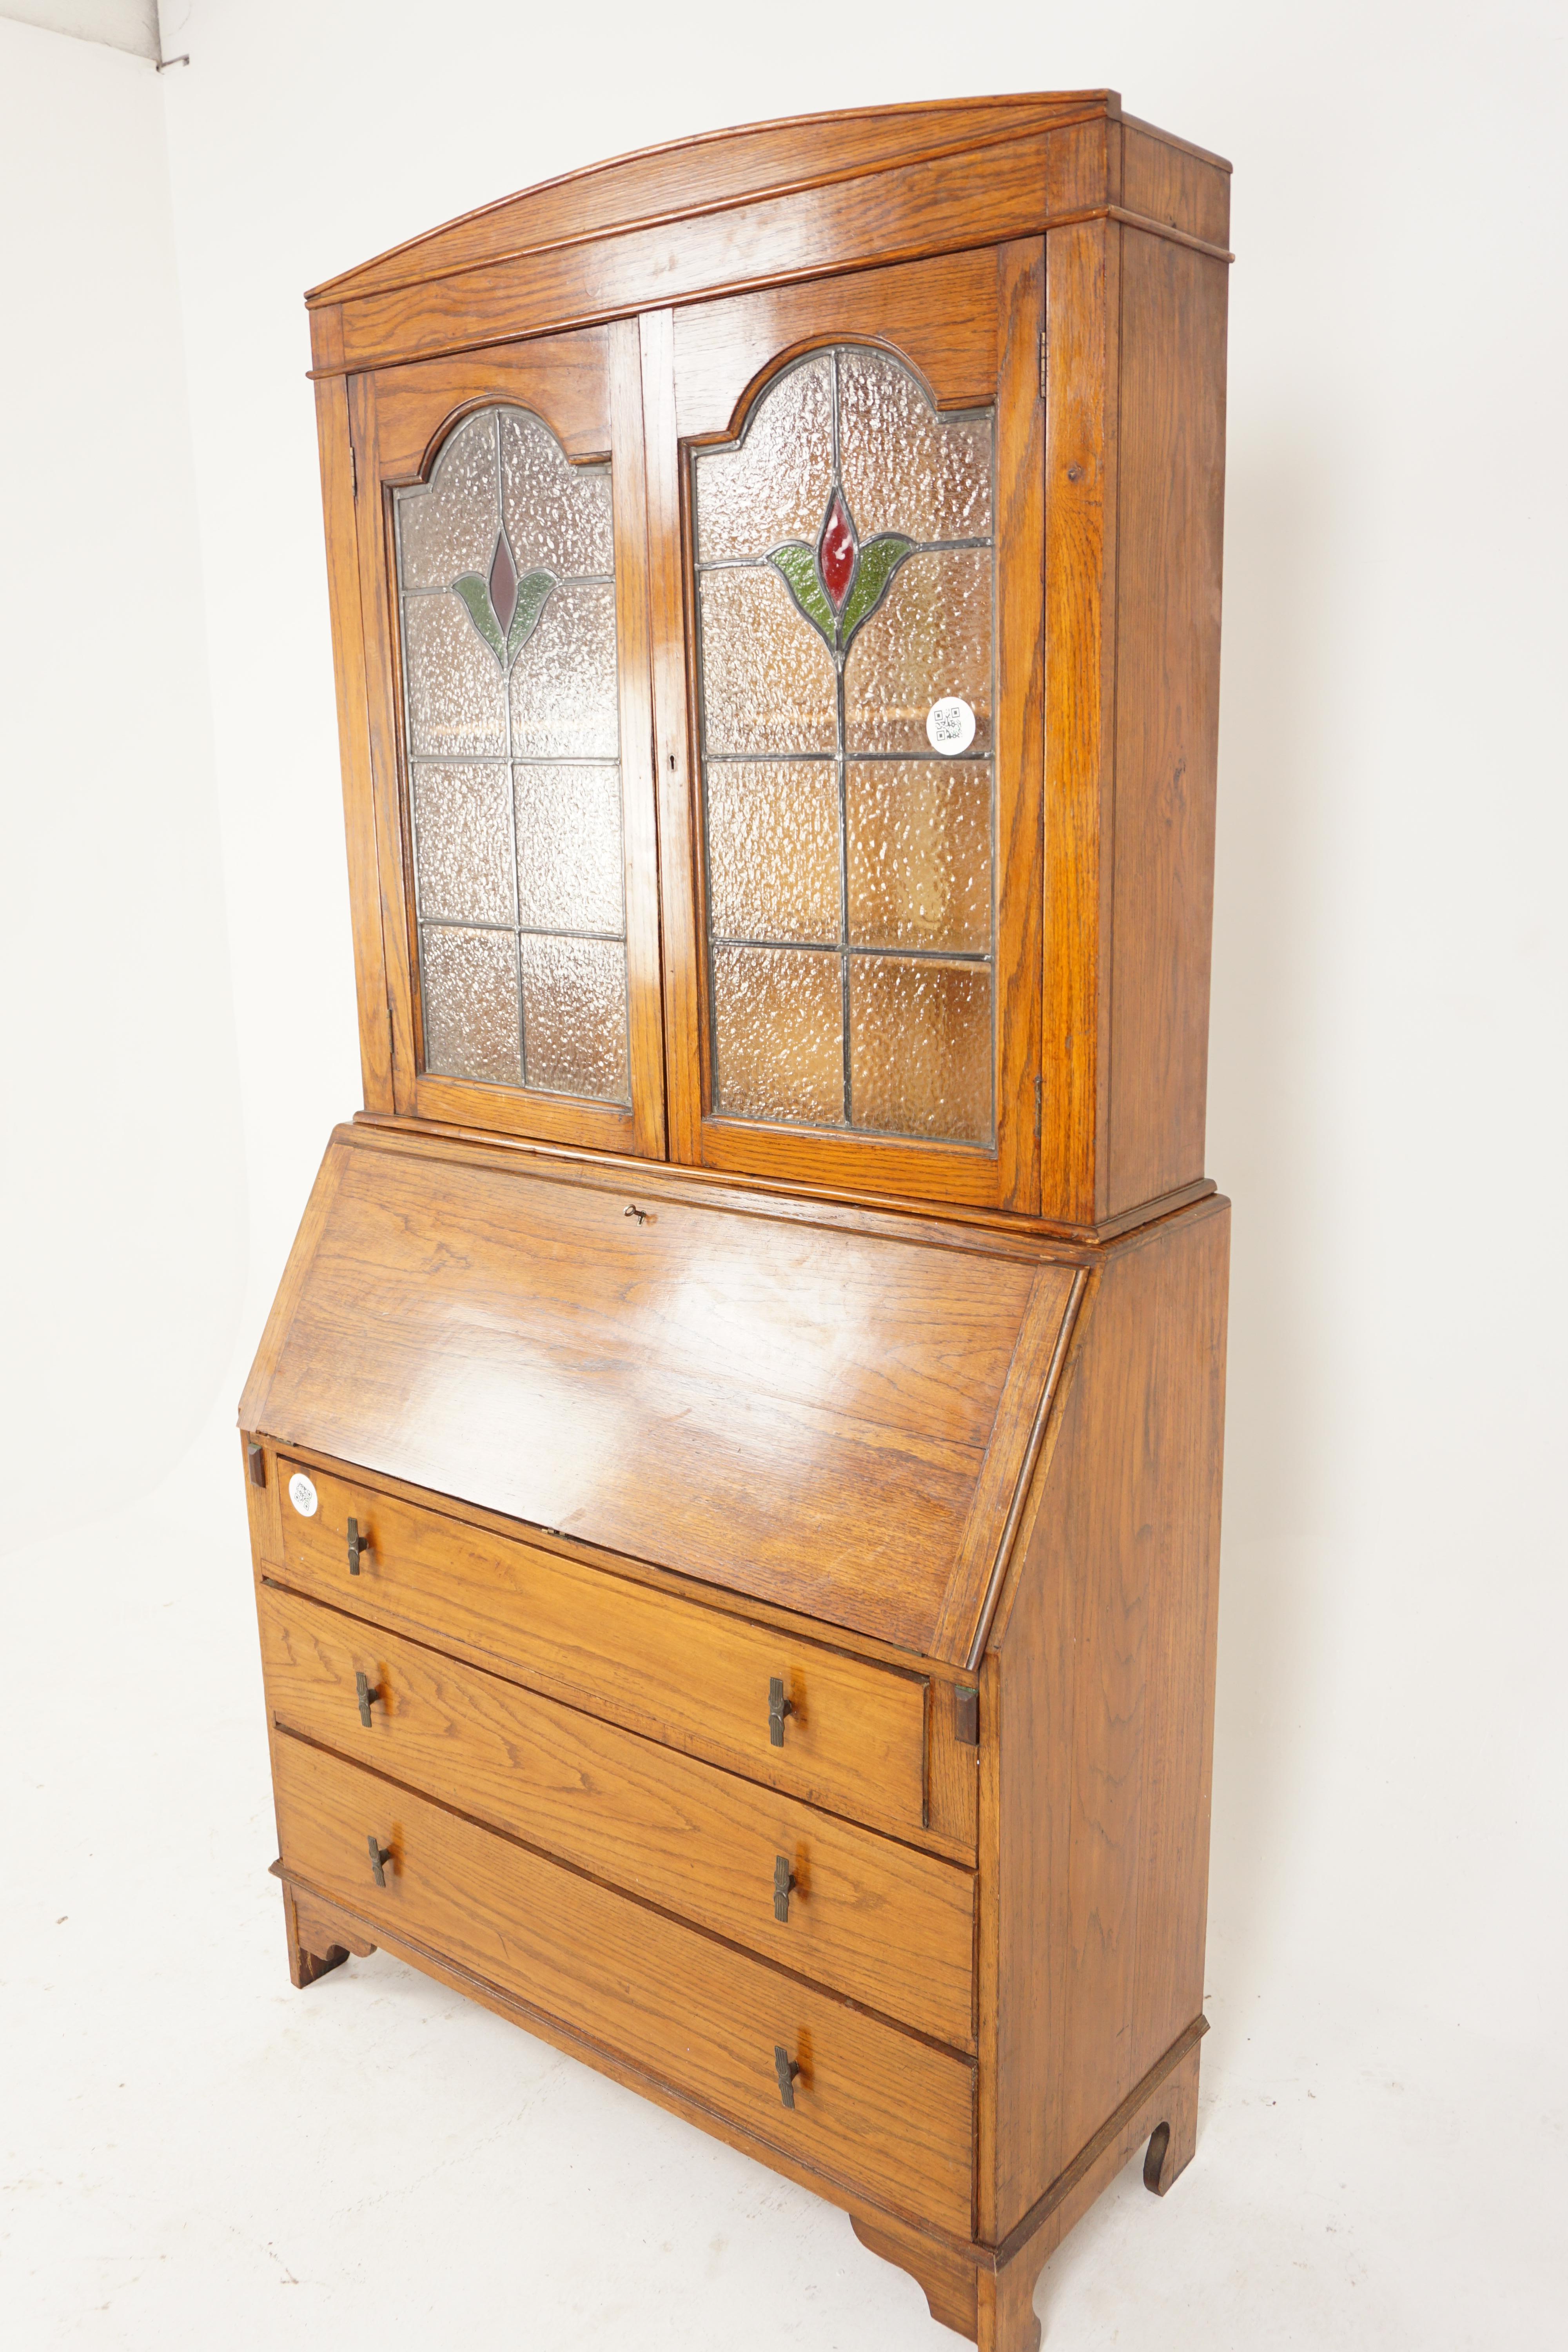 Vintage oak stained glass window slant front desk with bookcase top, desk, Scotland 1920, H800

Scotland 1920
Solid Oak
Original finish
Rectangular top
Shaped top with a pair of leaded glass doors
It has two adjustable oak shelves
The ball